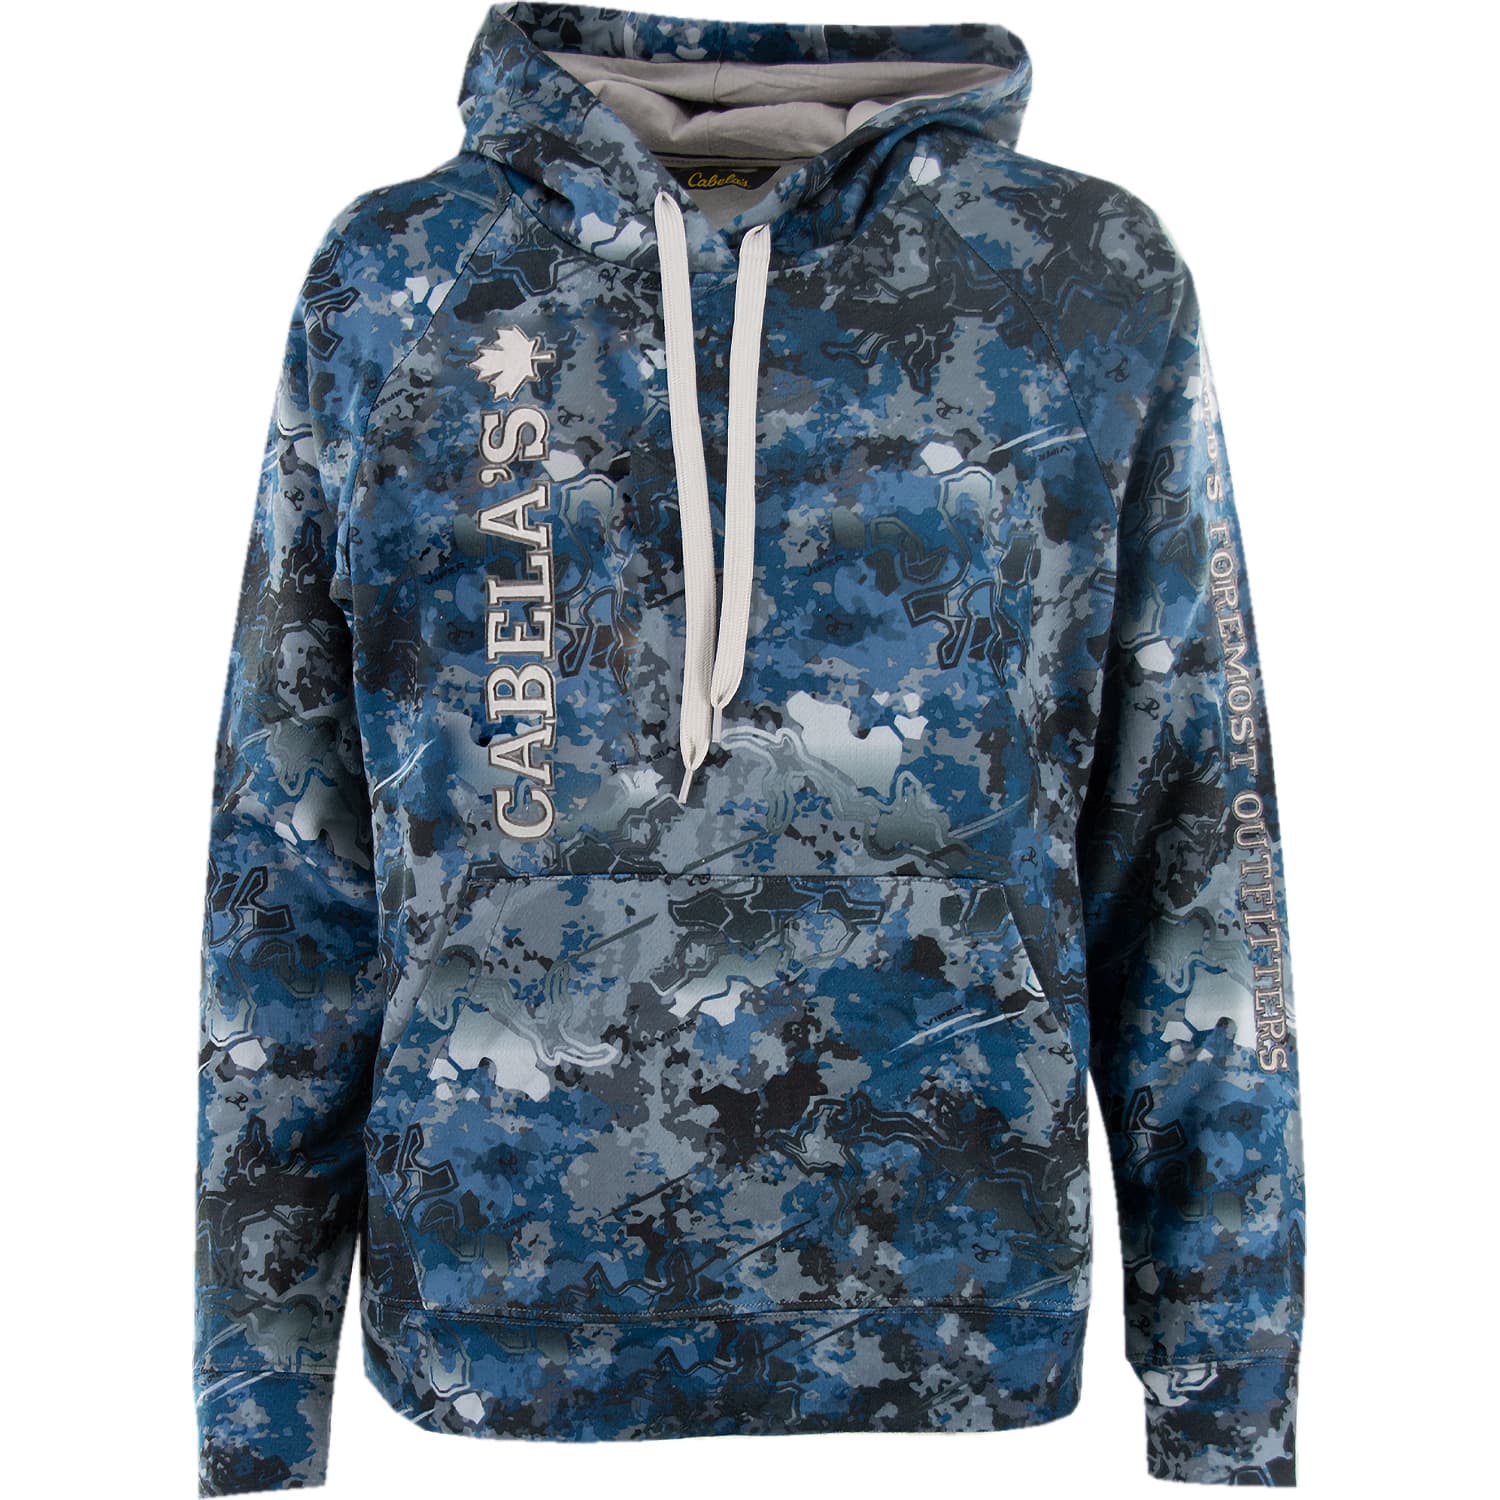 Cabela's Hoodies Only $10 + FREE Shipping – Men, Women and Kids